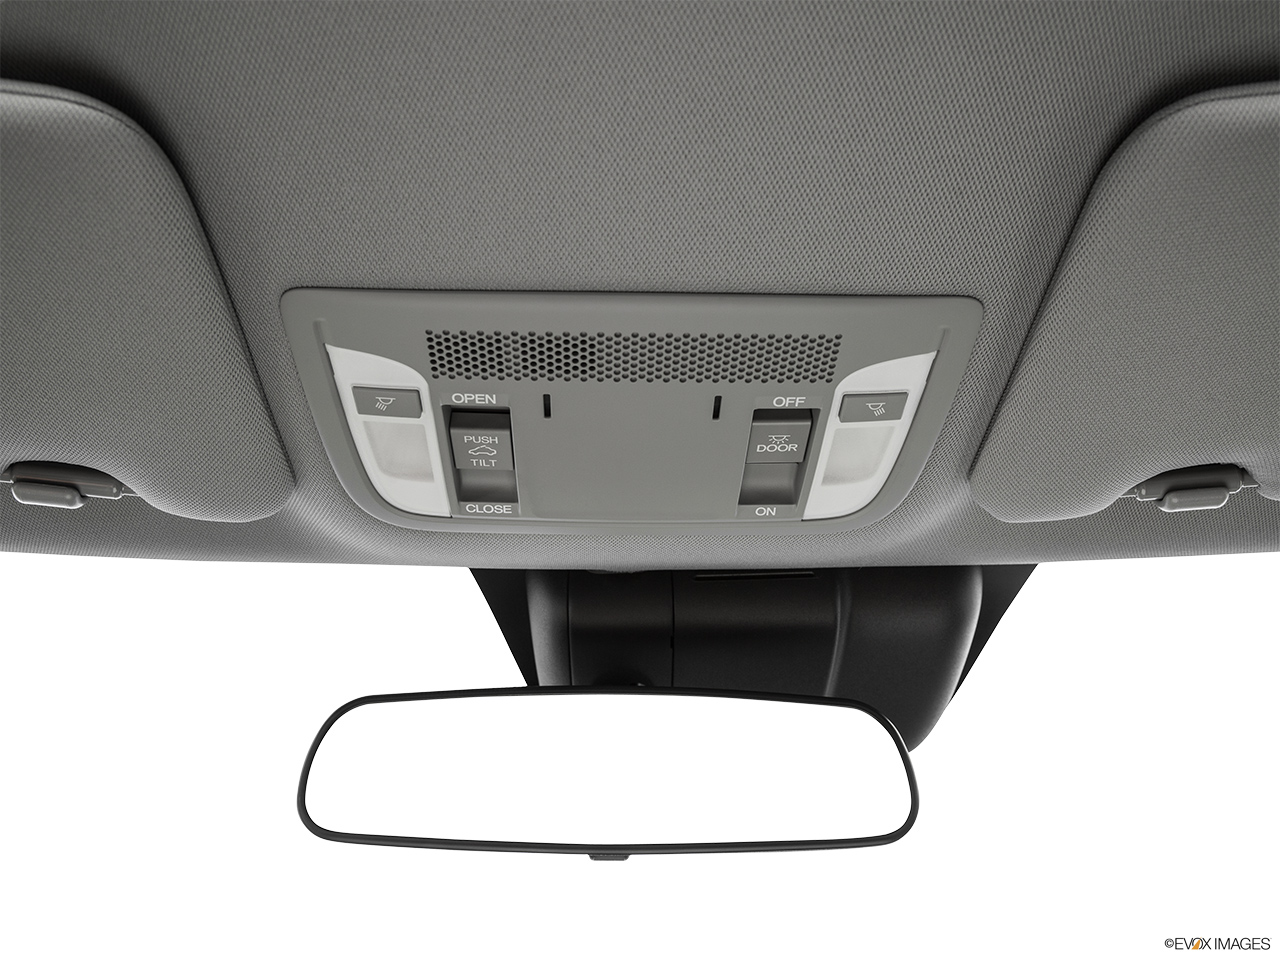 2016 Acura ILX AcuraWatch Plus Courtesy lamps/ceiling controls. 